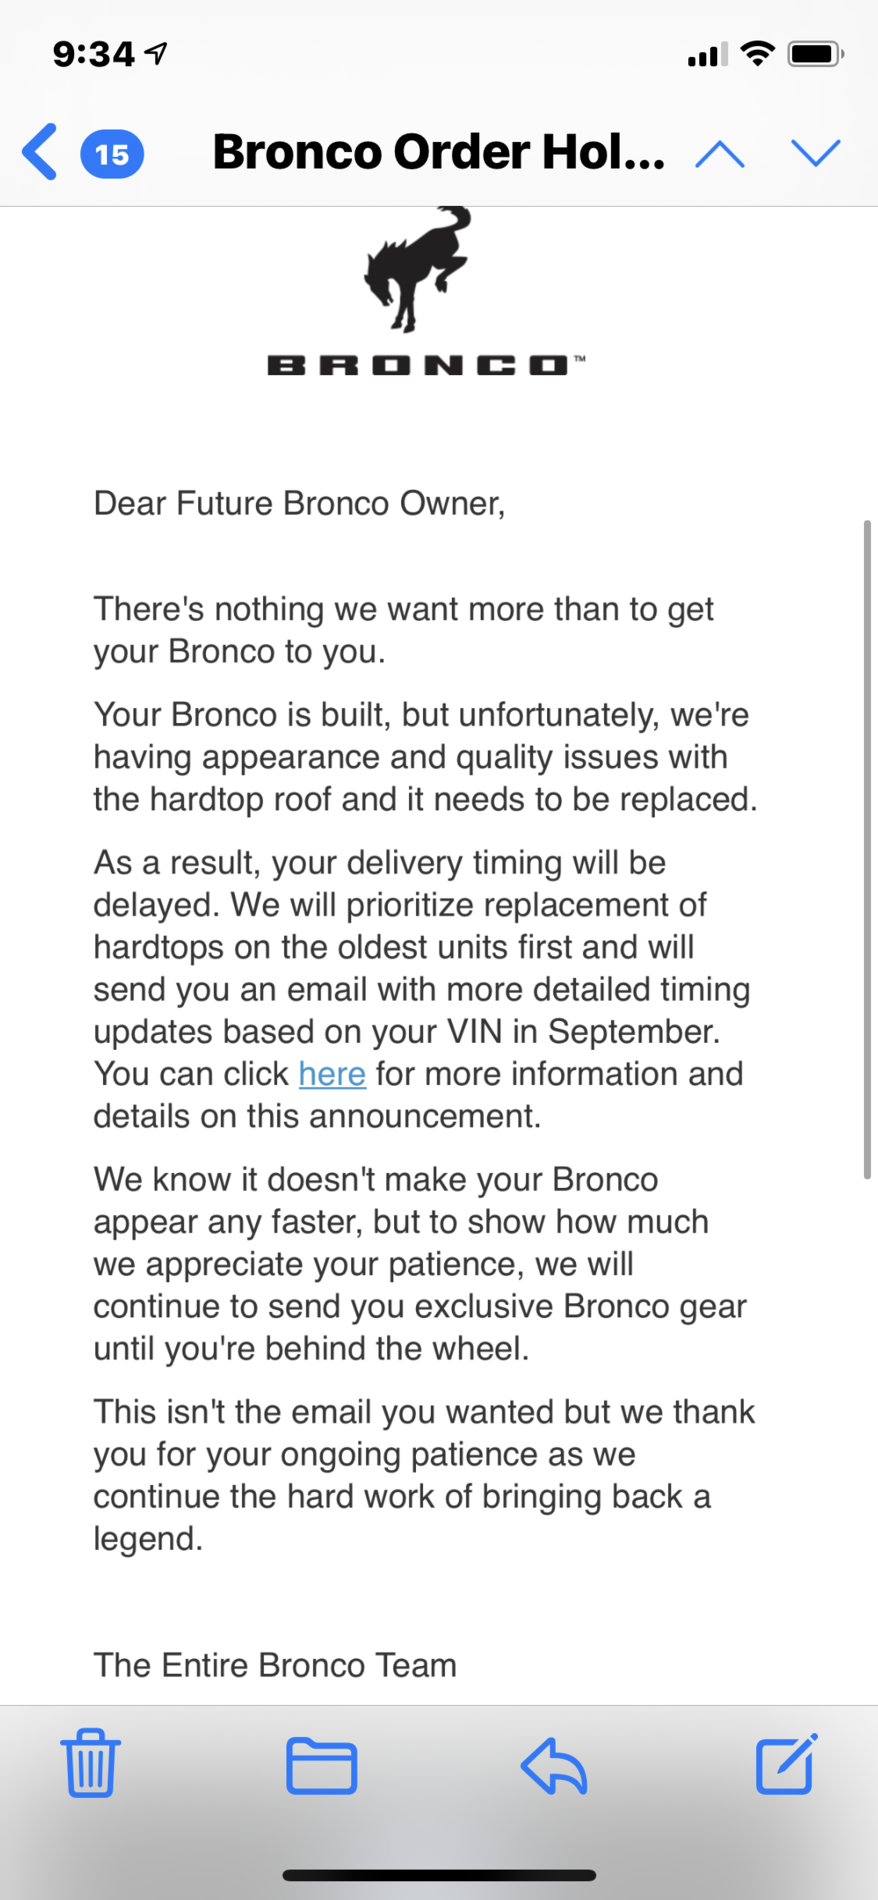 Ford Bronco Delivery delay emails have arrived [8/13] 7ED2557C-4F7E-4BA9-81A5-C11A6AED7C94